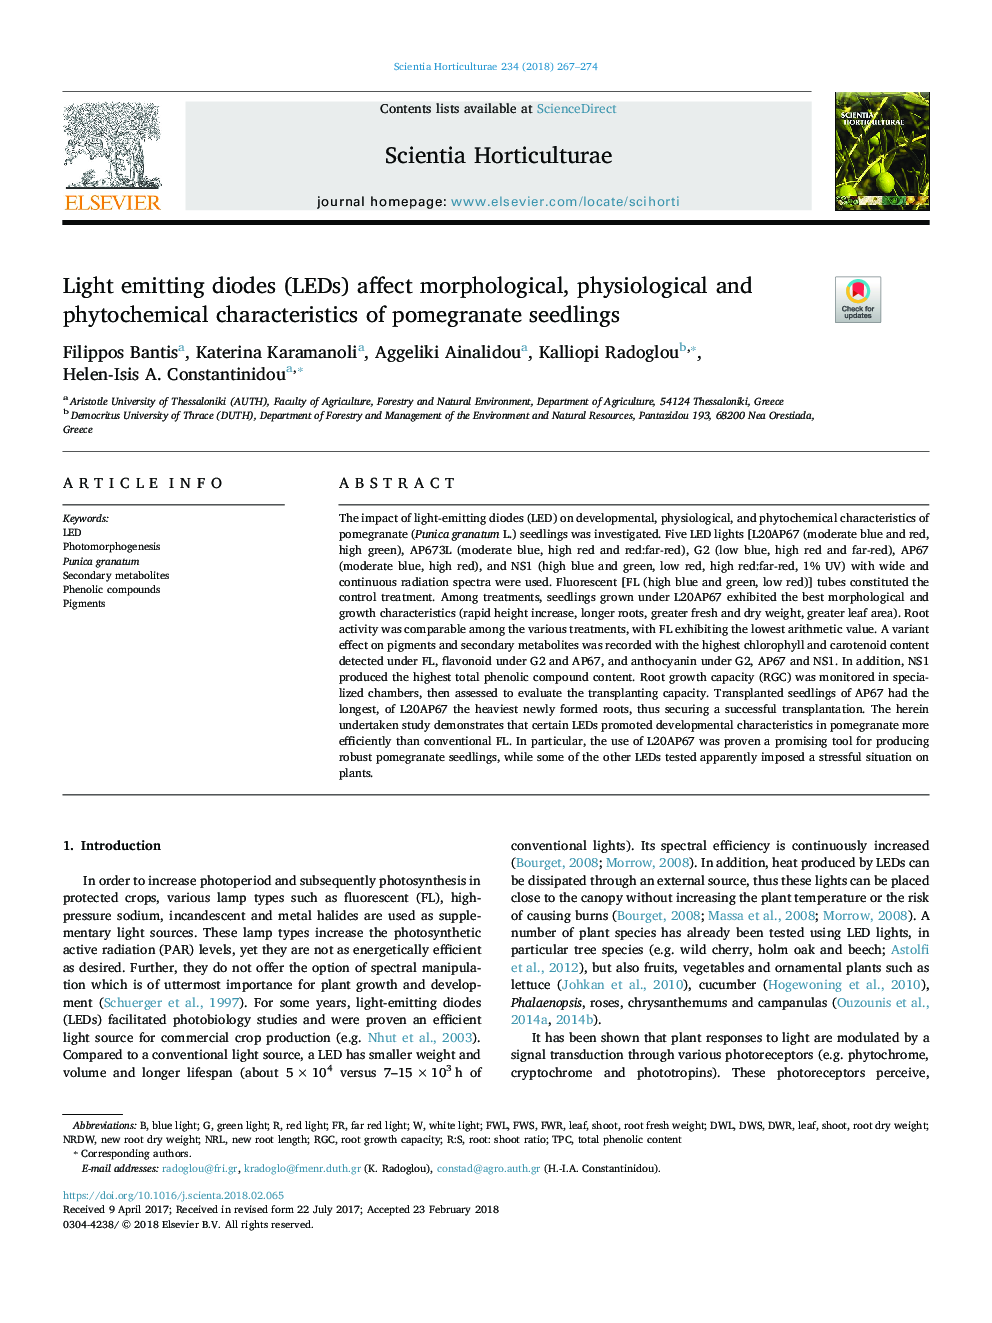 Light emitting diodes (LEDs) affect morphological, physiological and phytochemical characteristics of pomegranate seedlings